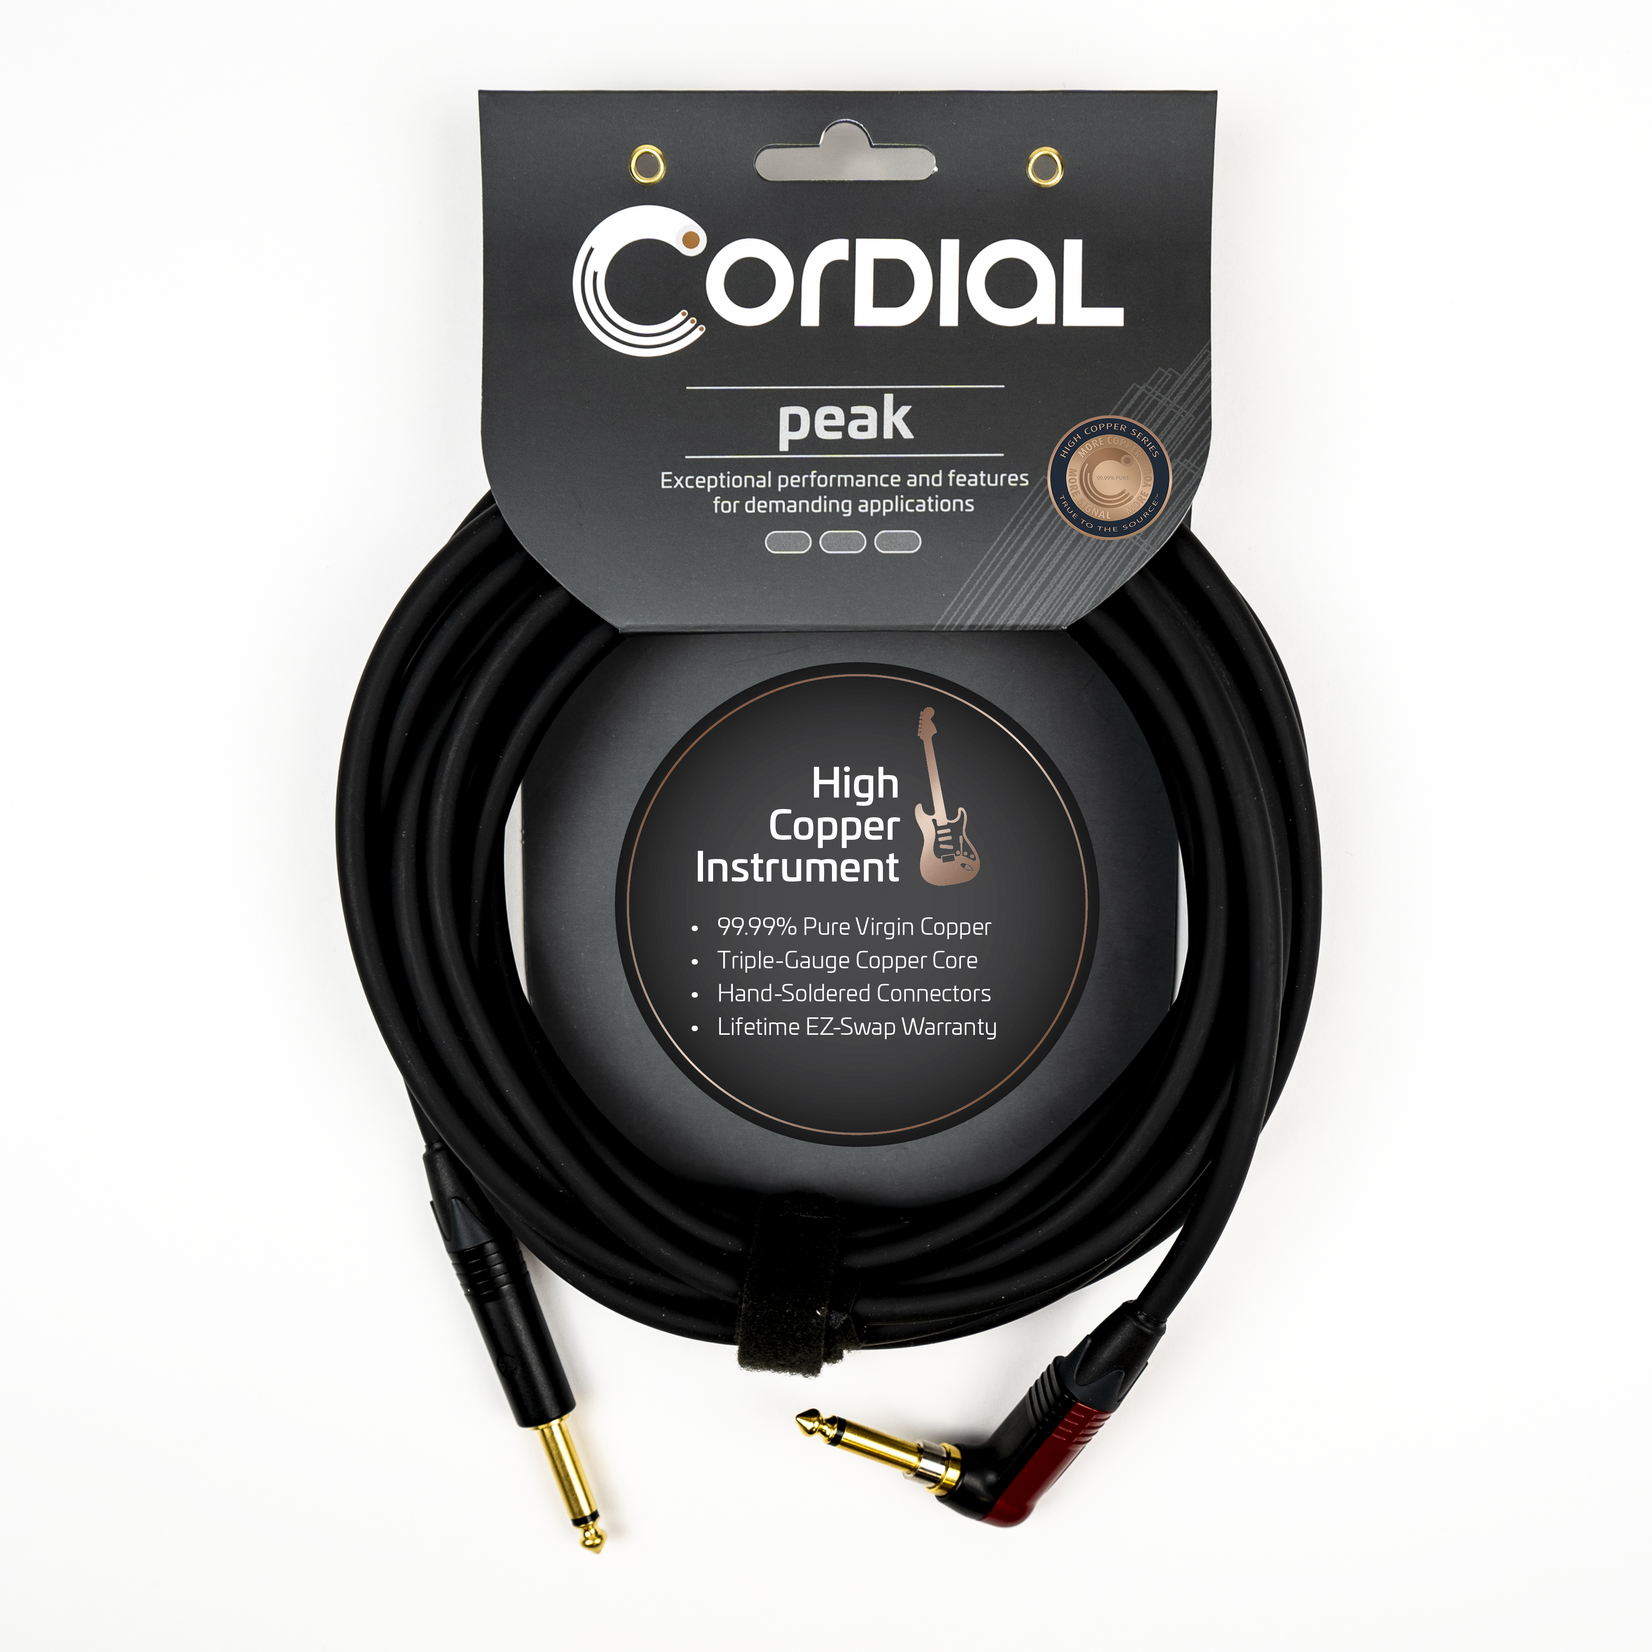 Cordial Cables Cordial 3m / 6ft Premium Instrument High-Copper Silent Plug Cable, Peak Series - 1/4'' Straight to 1/4'' Right Angle Silent Plug (CSI 3 RP-SILENT)